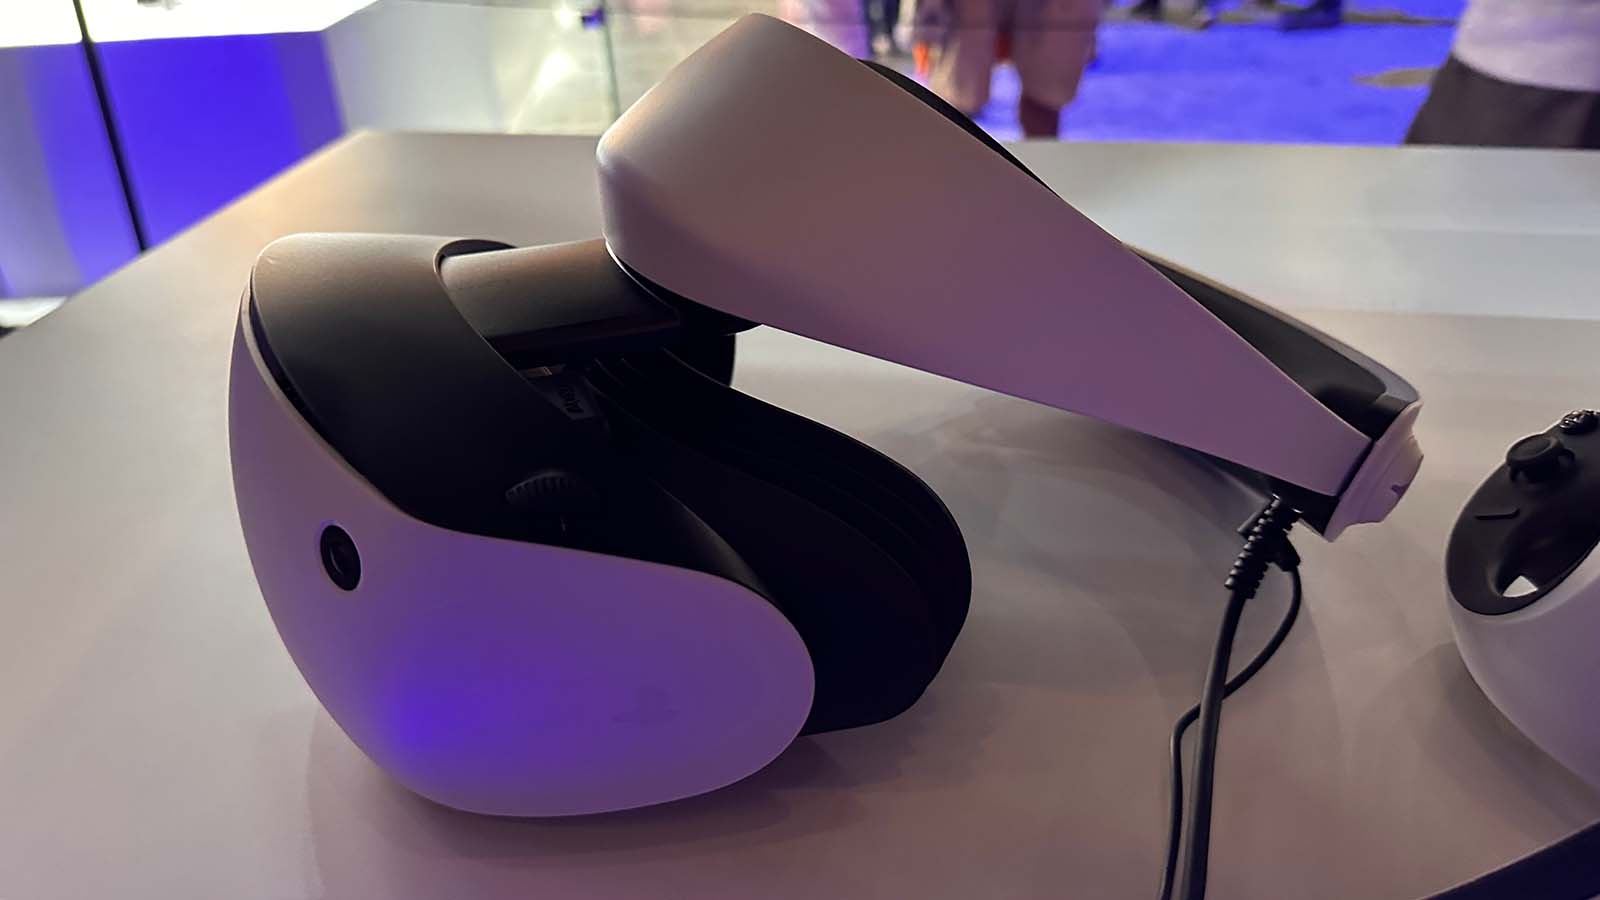 PSVR 2 is a VR system built for an immersive gaming experience, The  DeanBeat